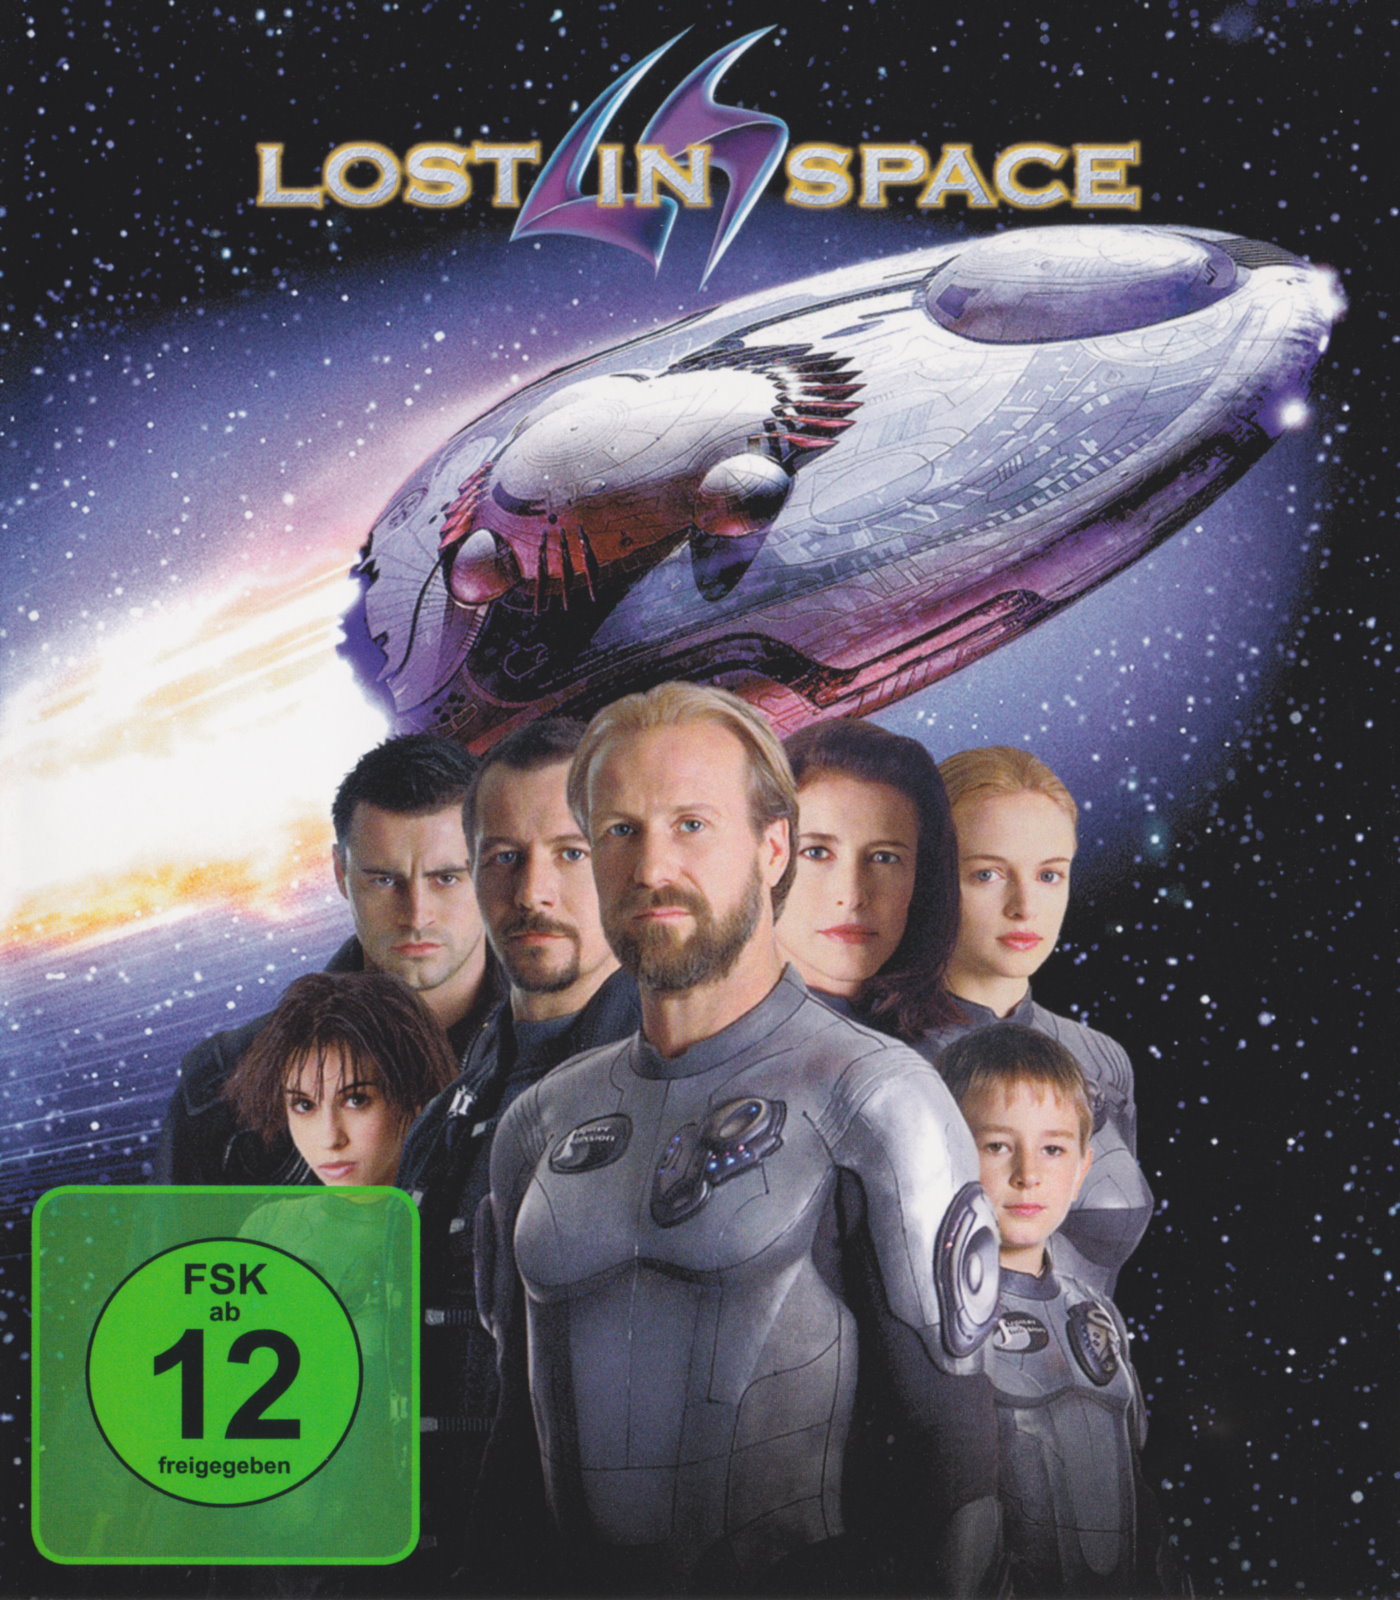 Cover - Lost in Space.jpg